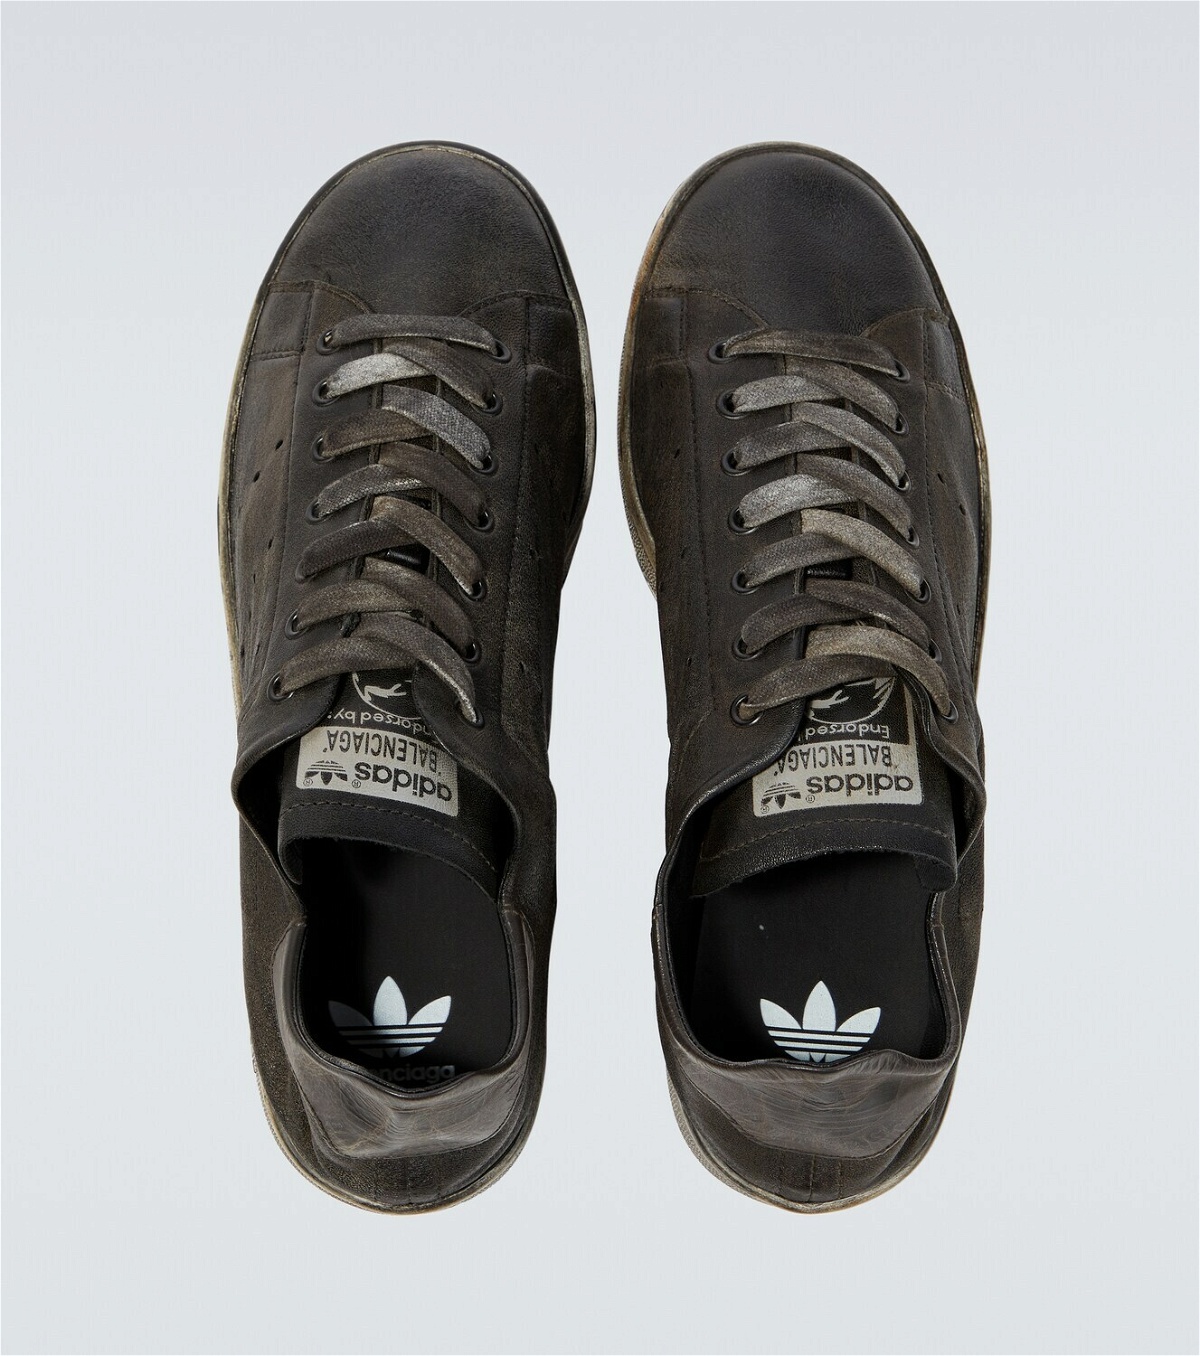 x Adidas Stan Smith distressed leather sneakers in black